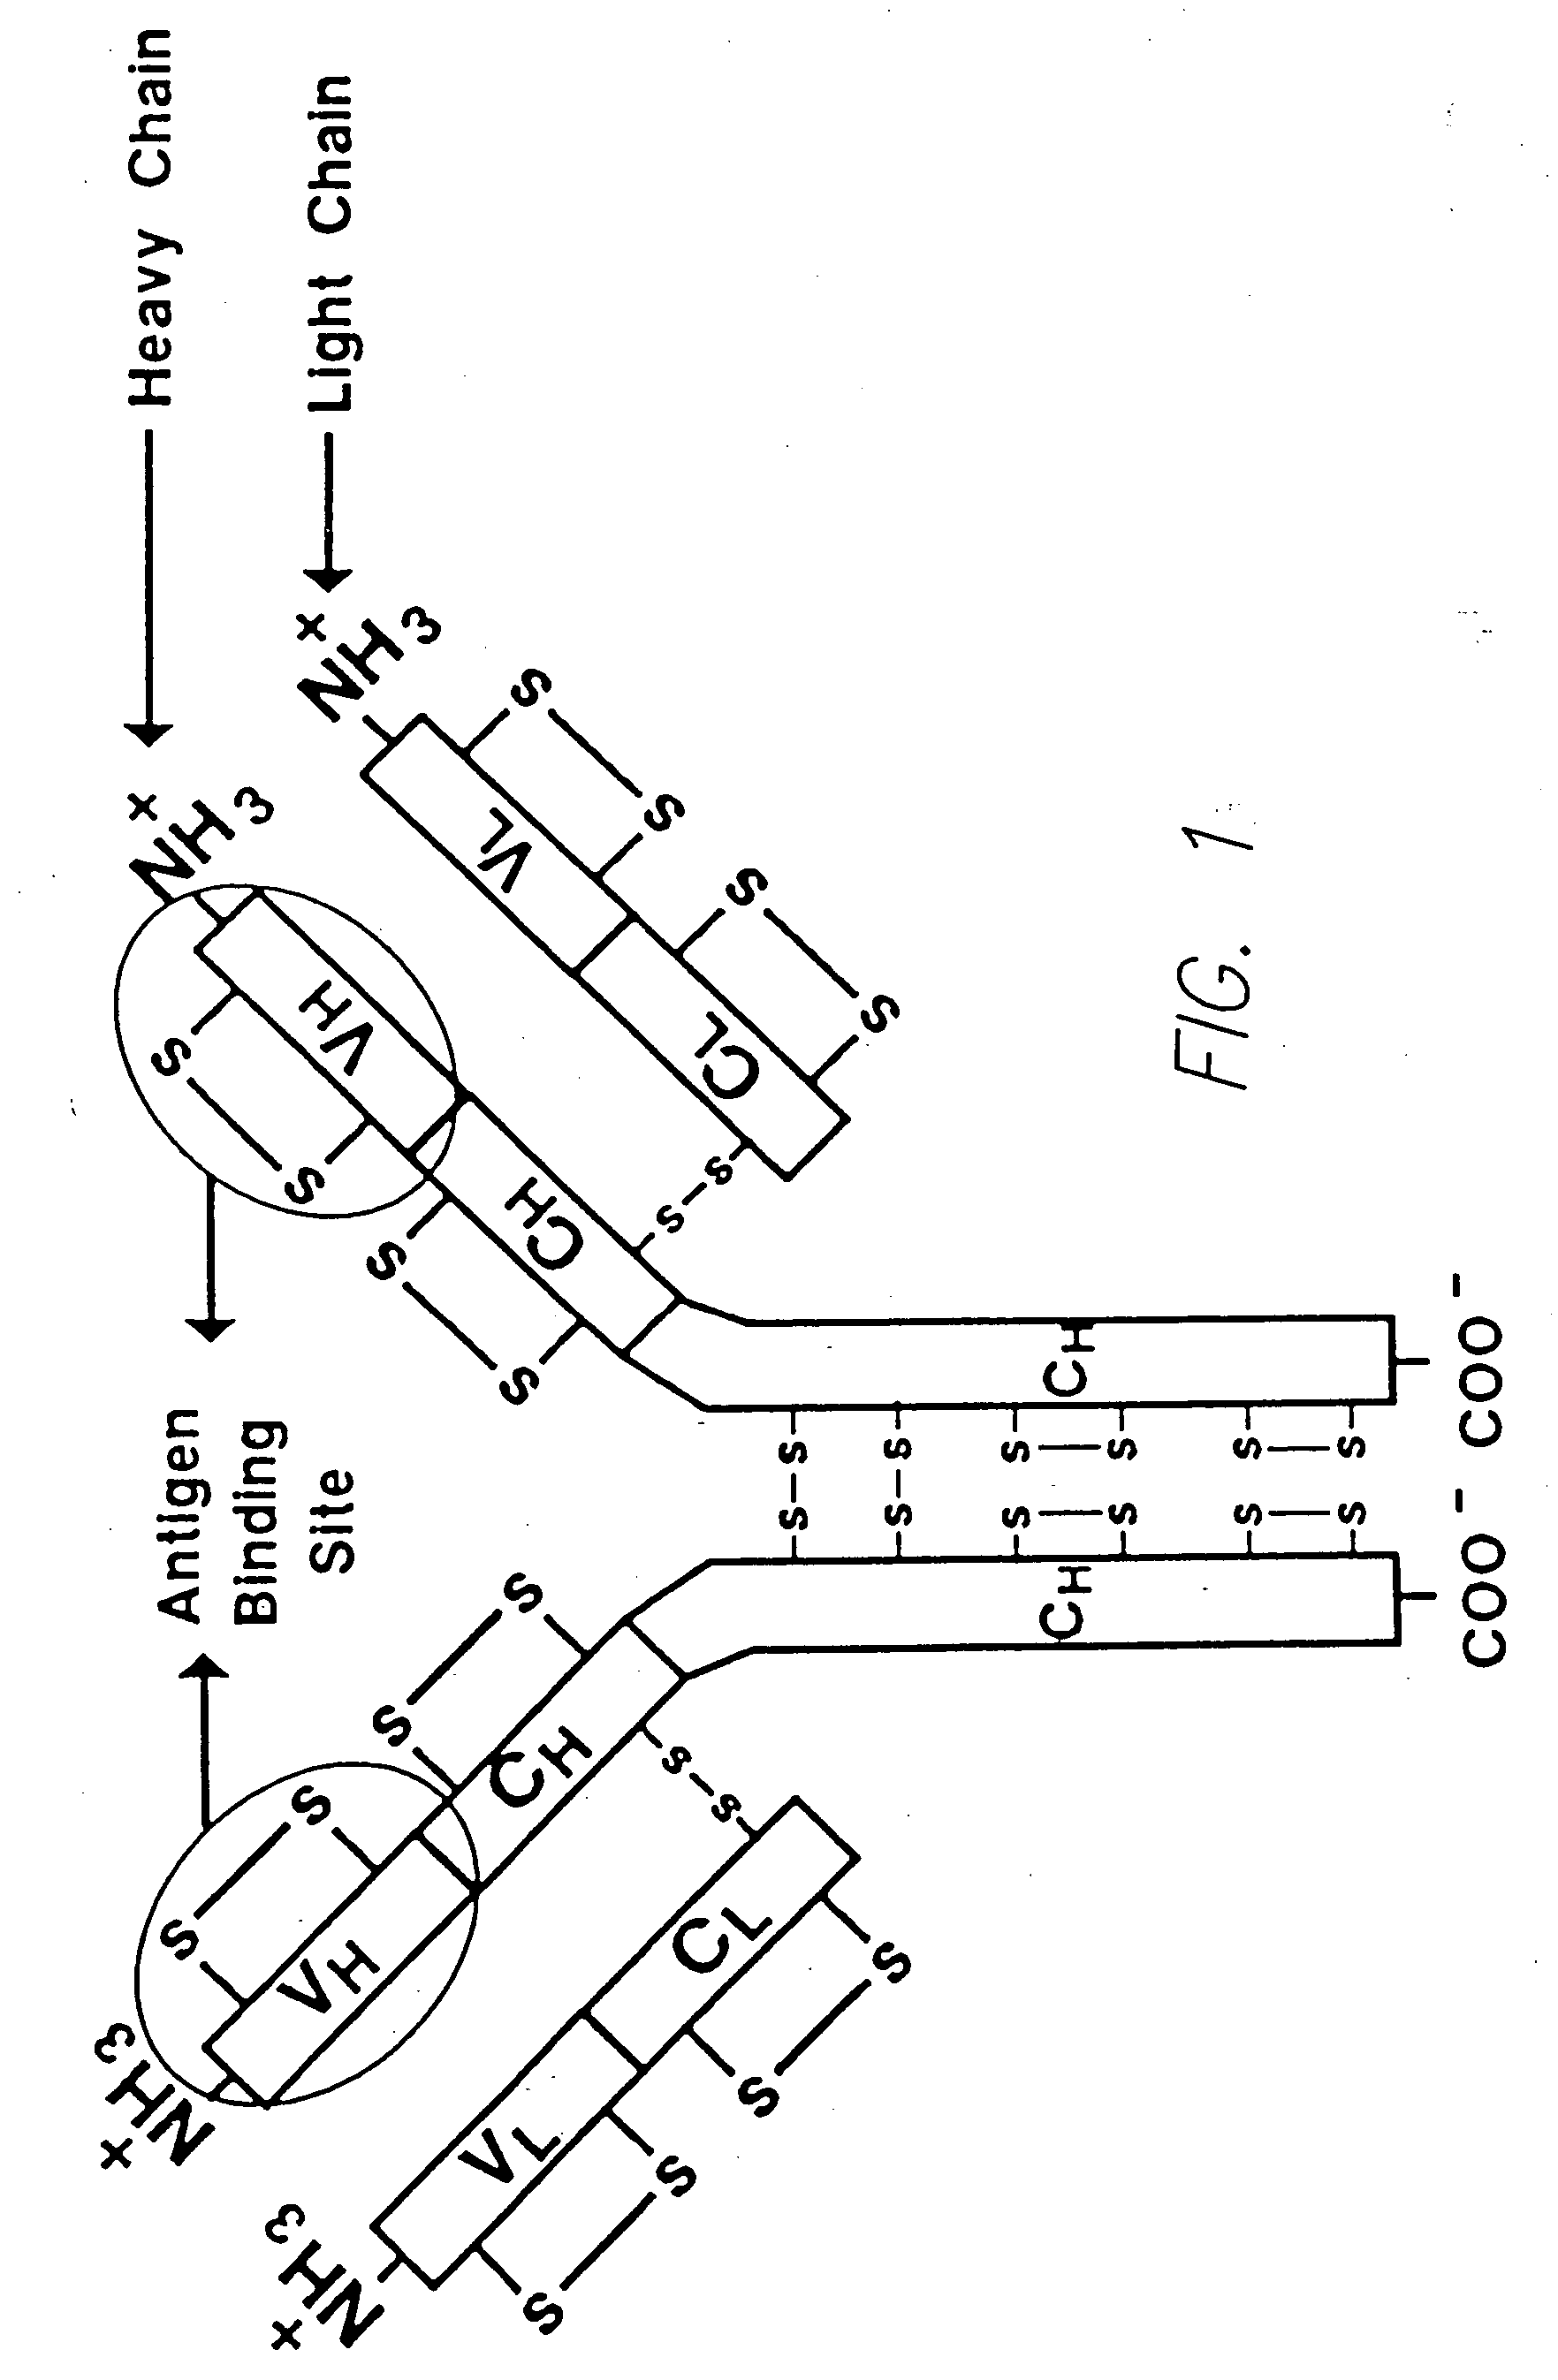 Method for tapping the immunological repertoire